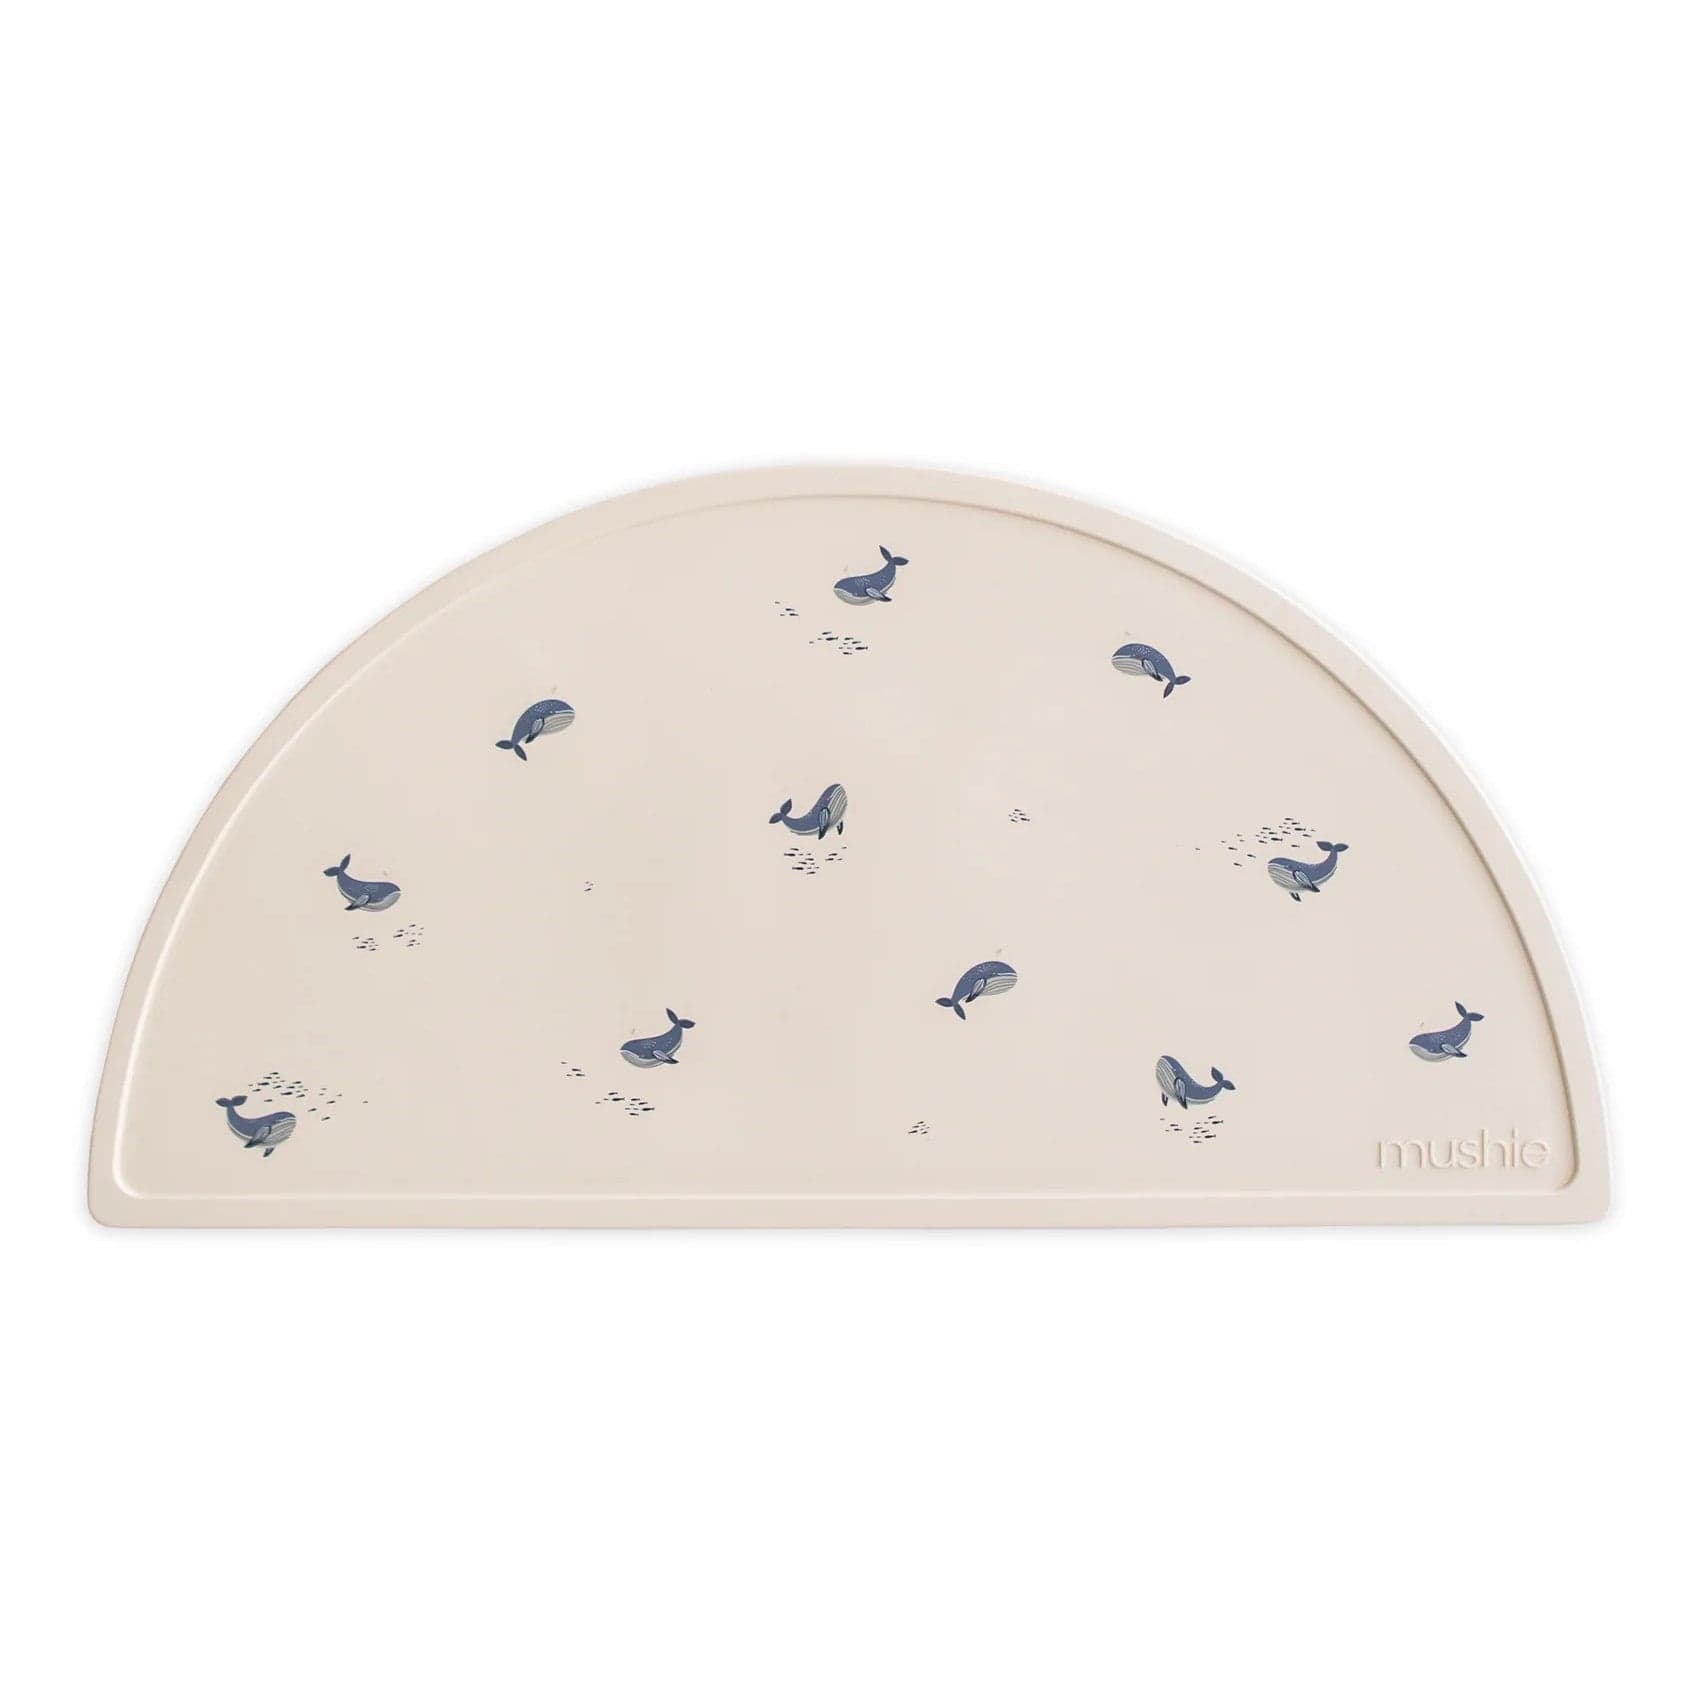 Mushie Baby Accessory Whales Mushie Silicone Placemats